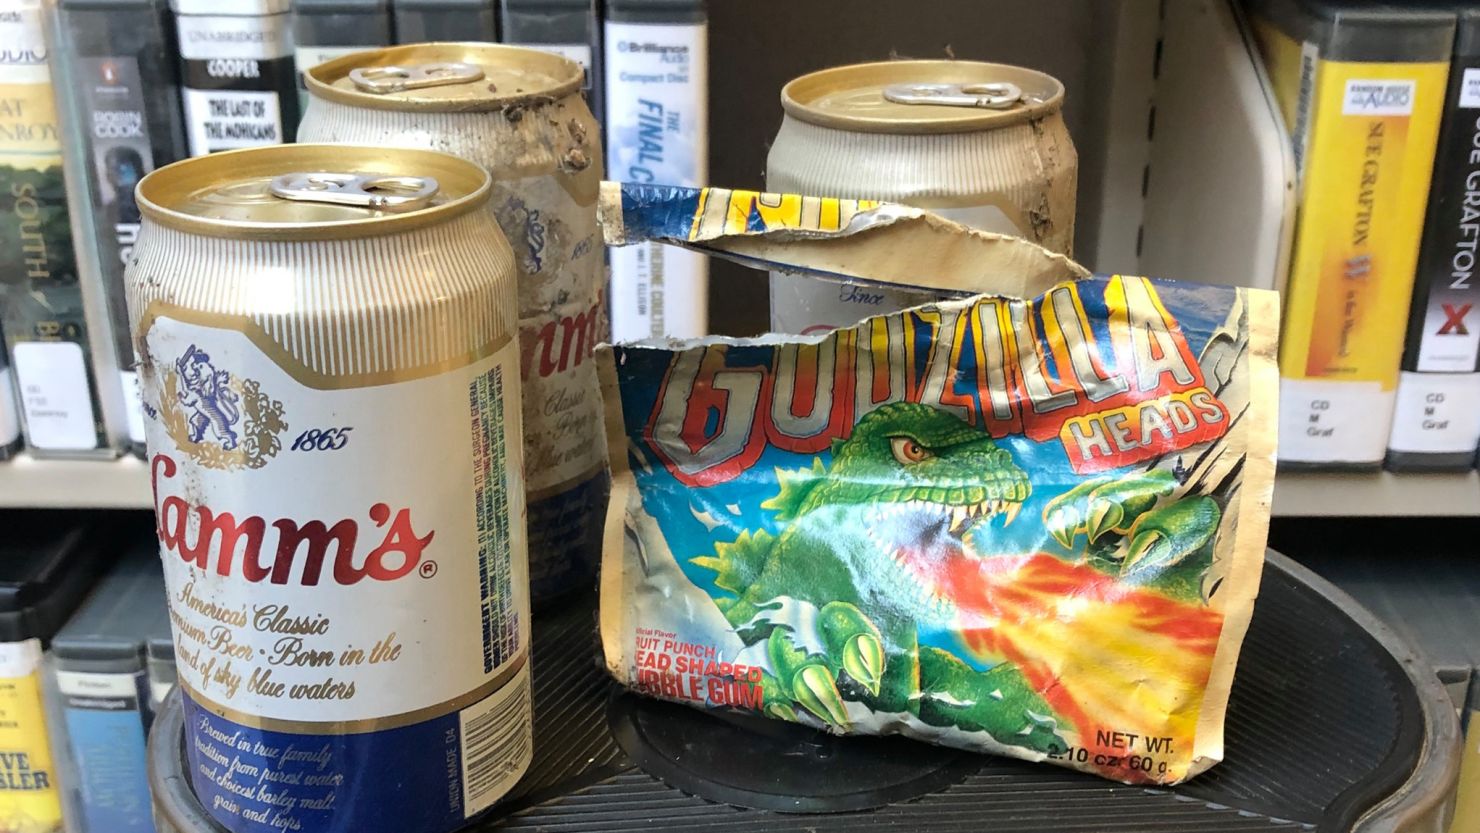 A stash of beer and gum dating back to the 1980s was found behind the shelves of a Washington library. 